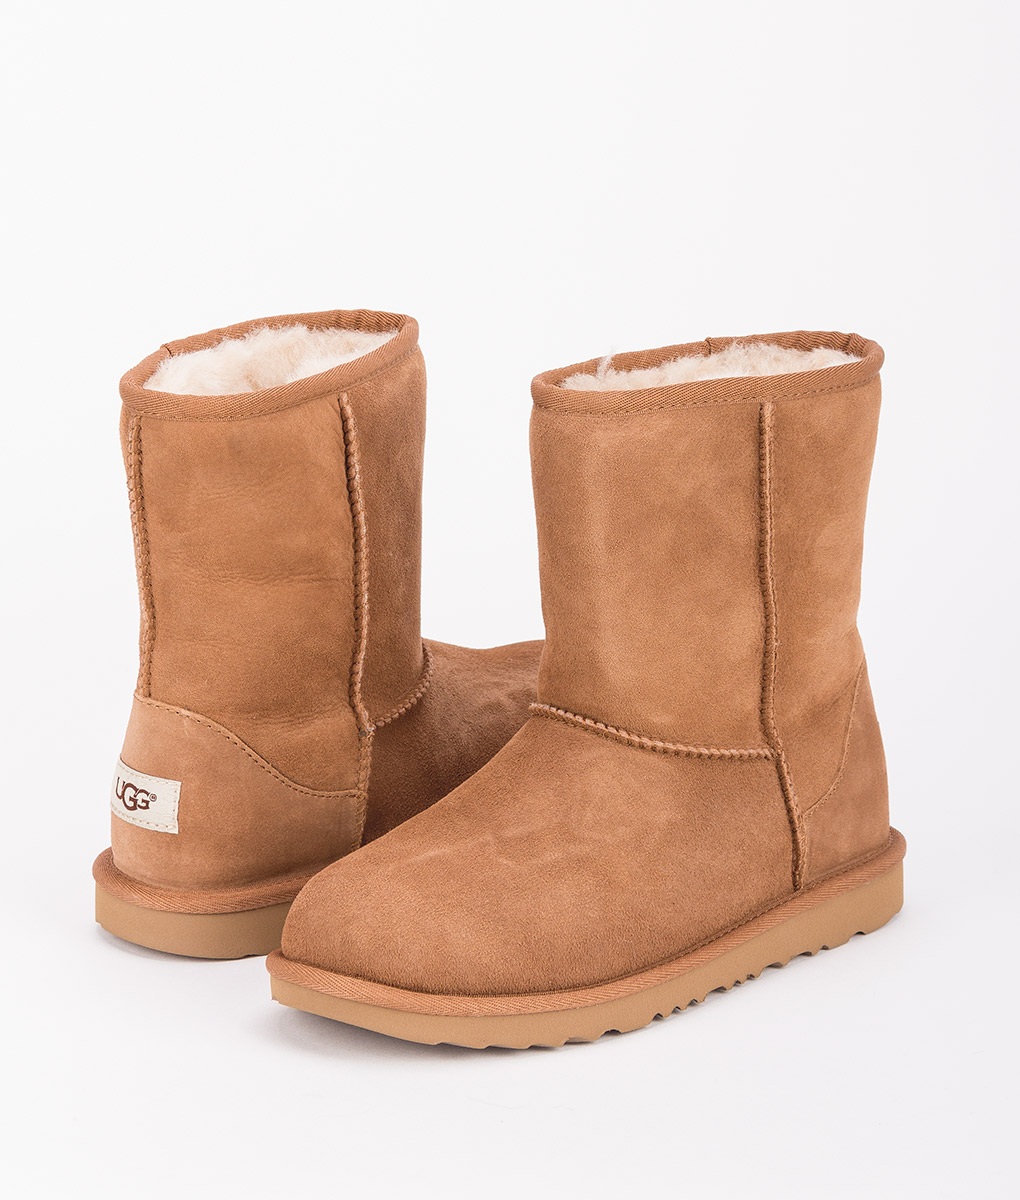 UGG Kids Ankle Boots 1017703K CLASSIC II, Chestnut 1